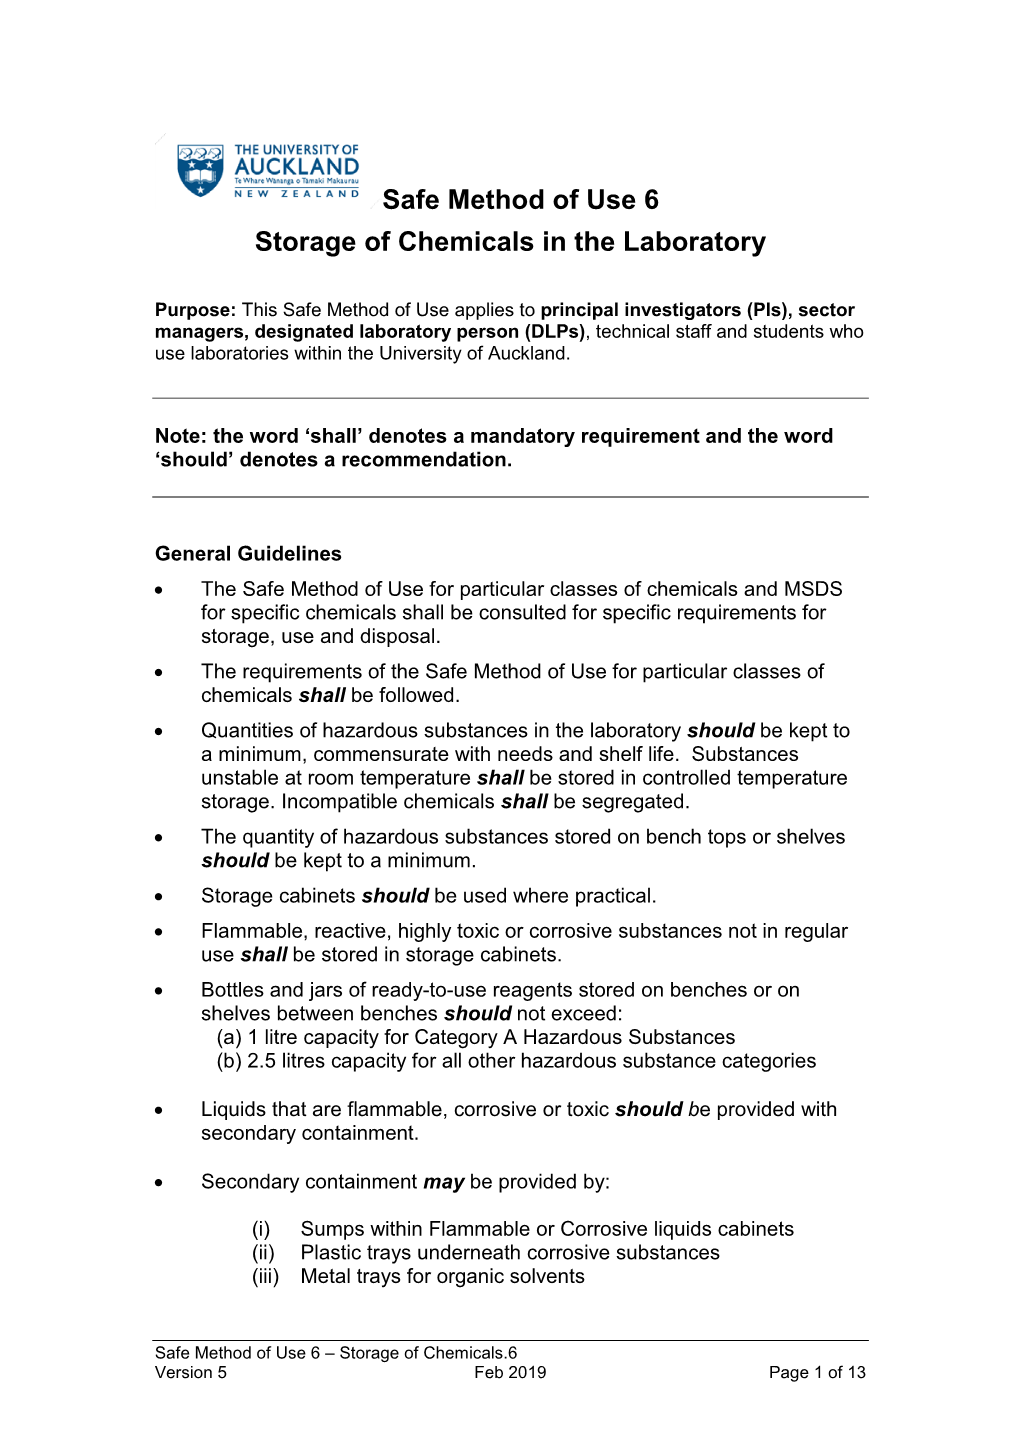 Safe Method of Use 6 Storage of Chemicals in the Laboratory